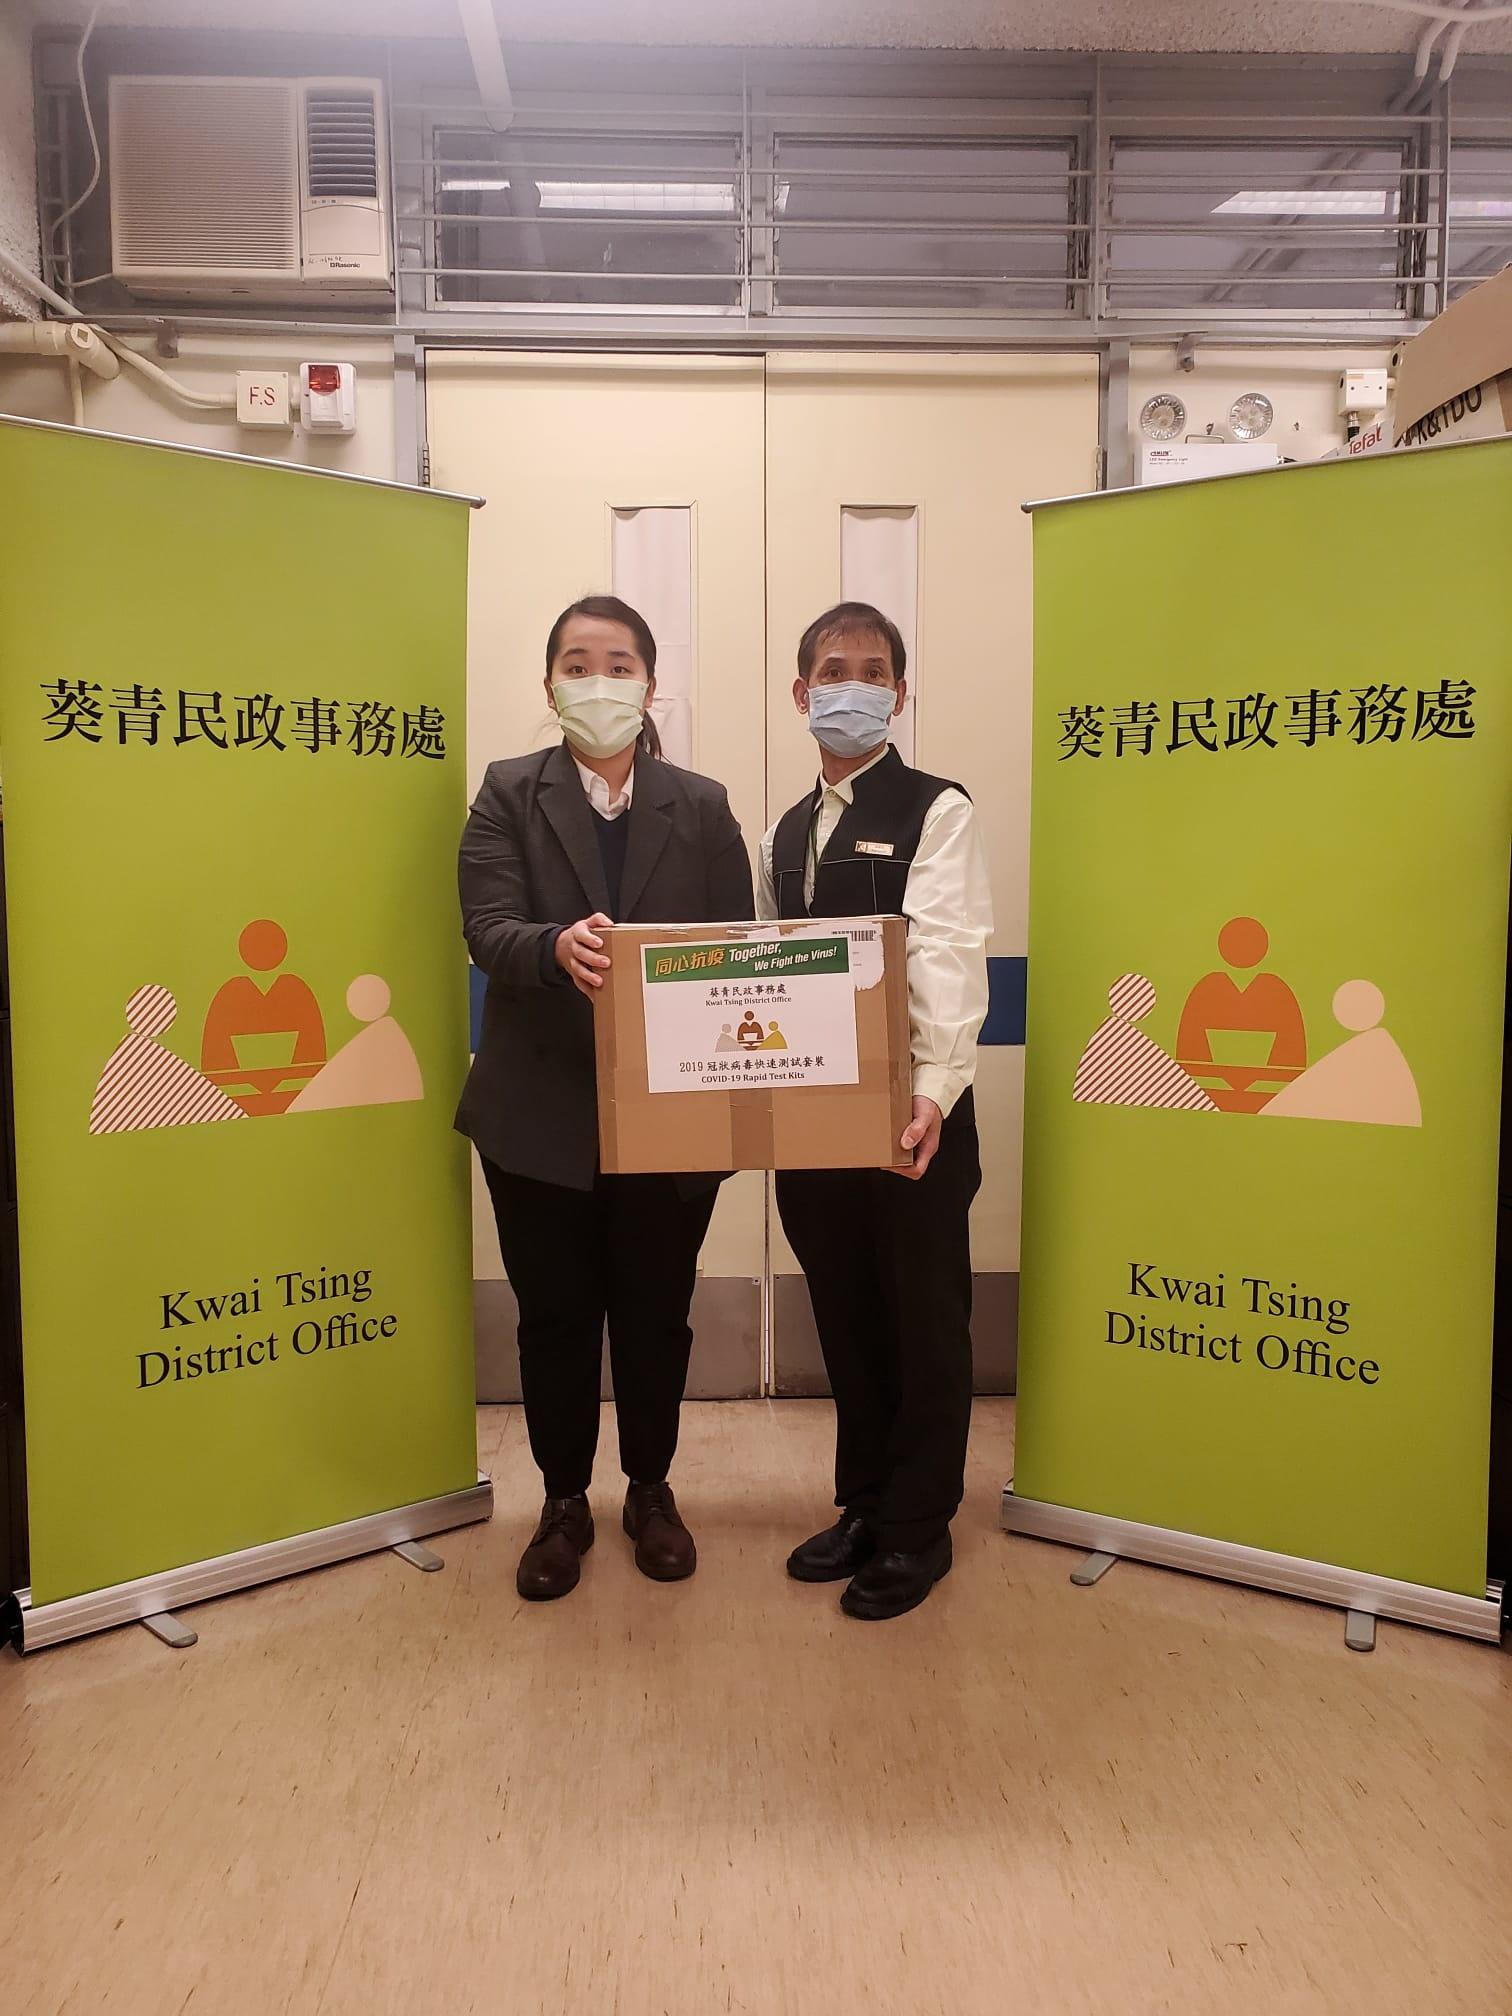 The Kwai Tsing District Office today (February 23) distributed COVID-19 rapid test kits to cleansing workers and property management staff working in Greenfield Garden, Tsing Yi for voluntary testing through the property management company.